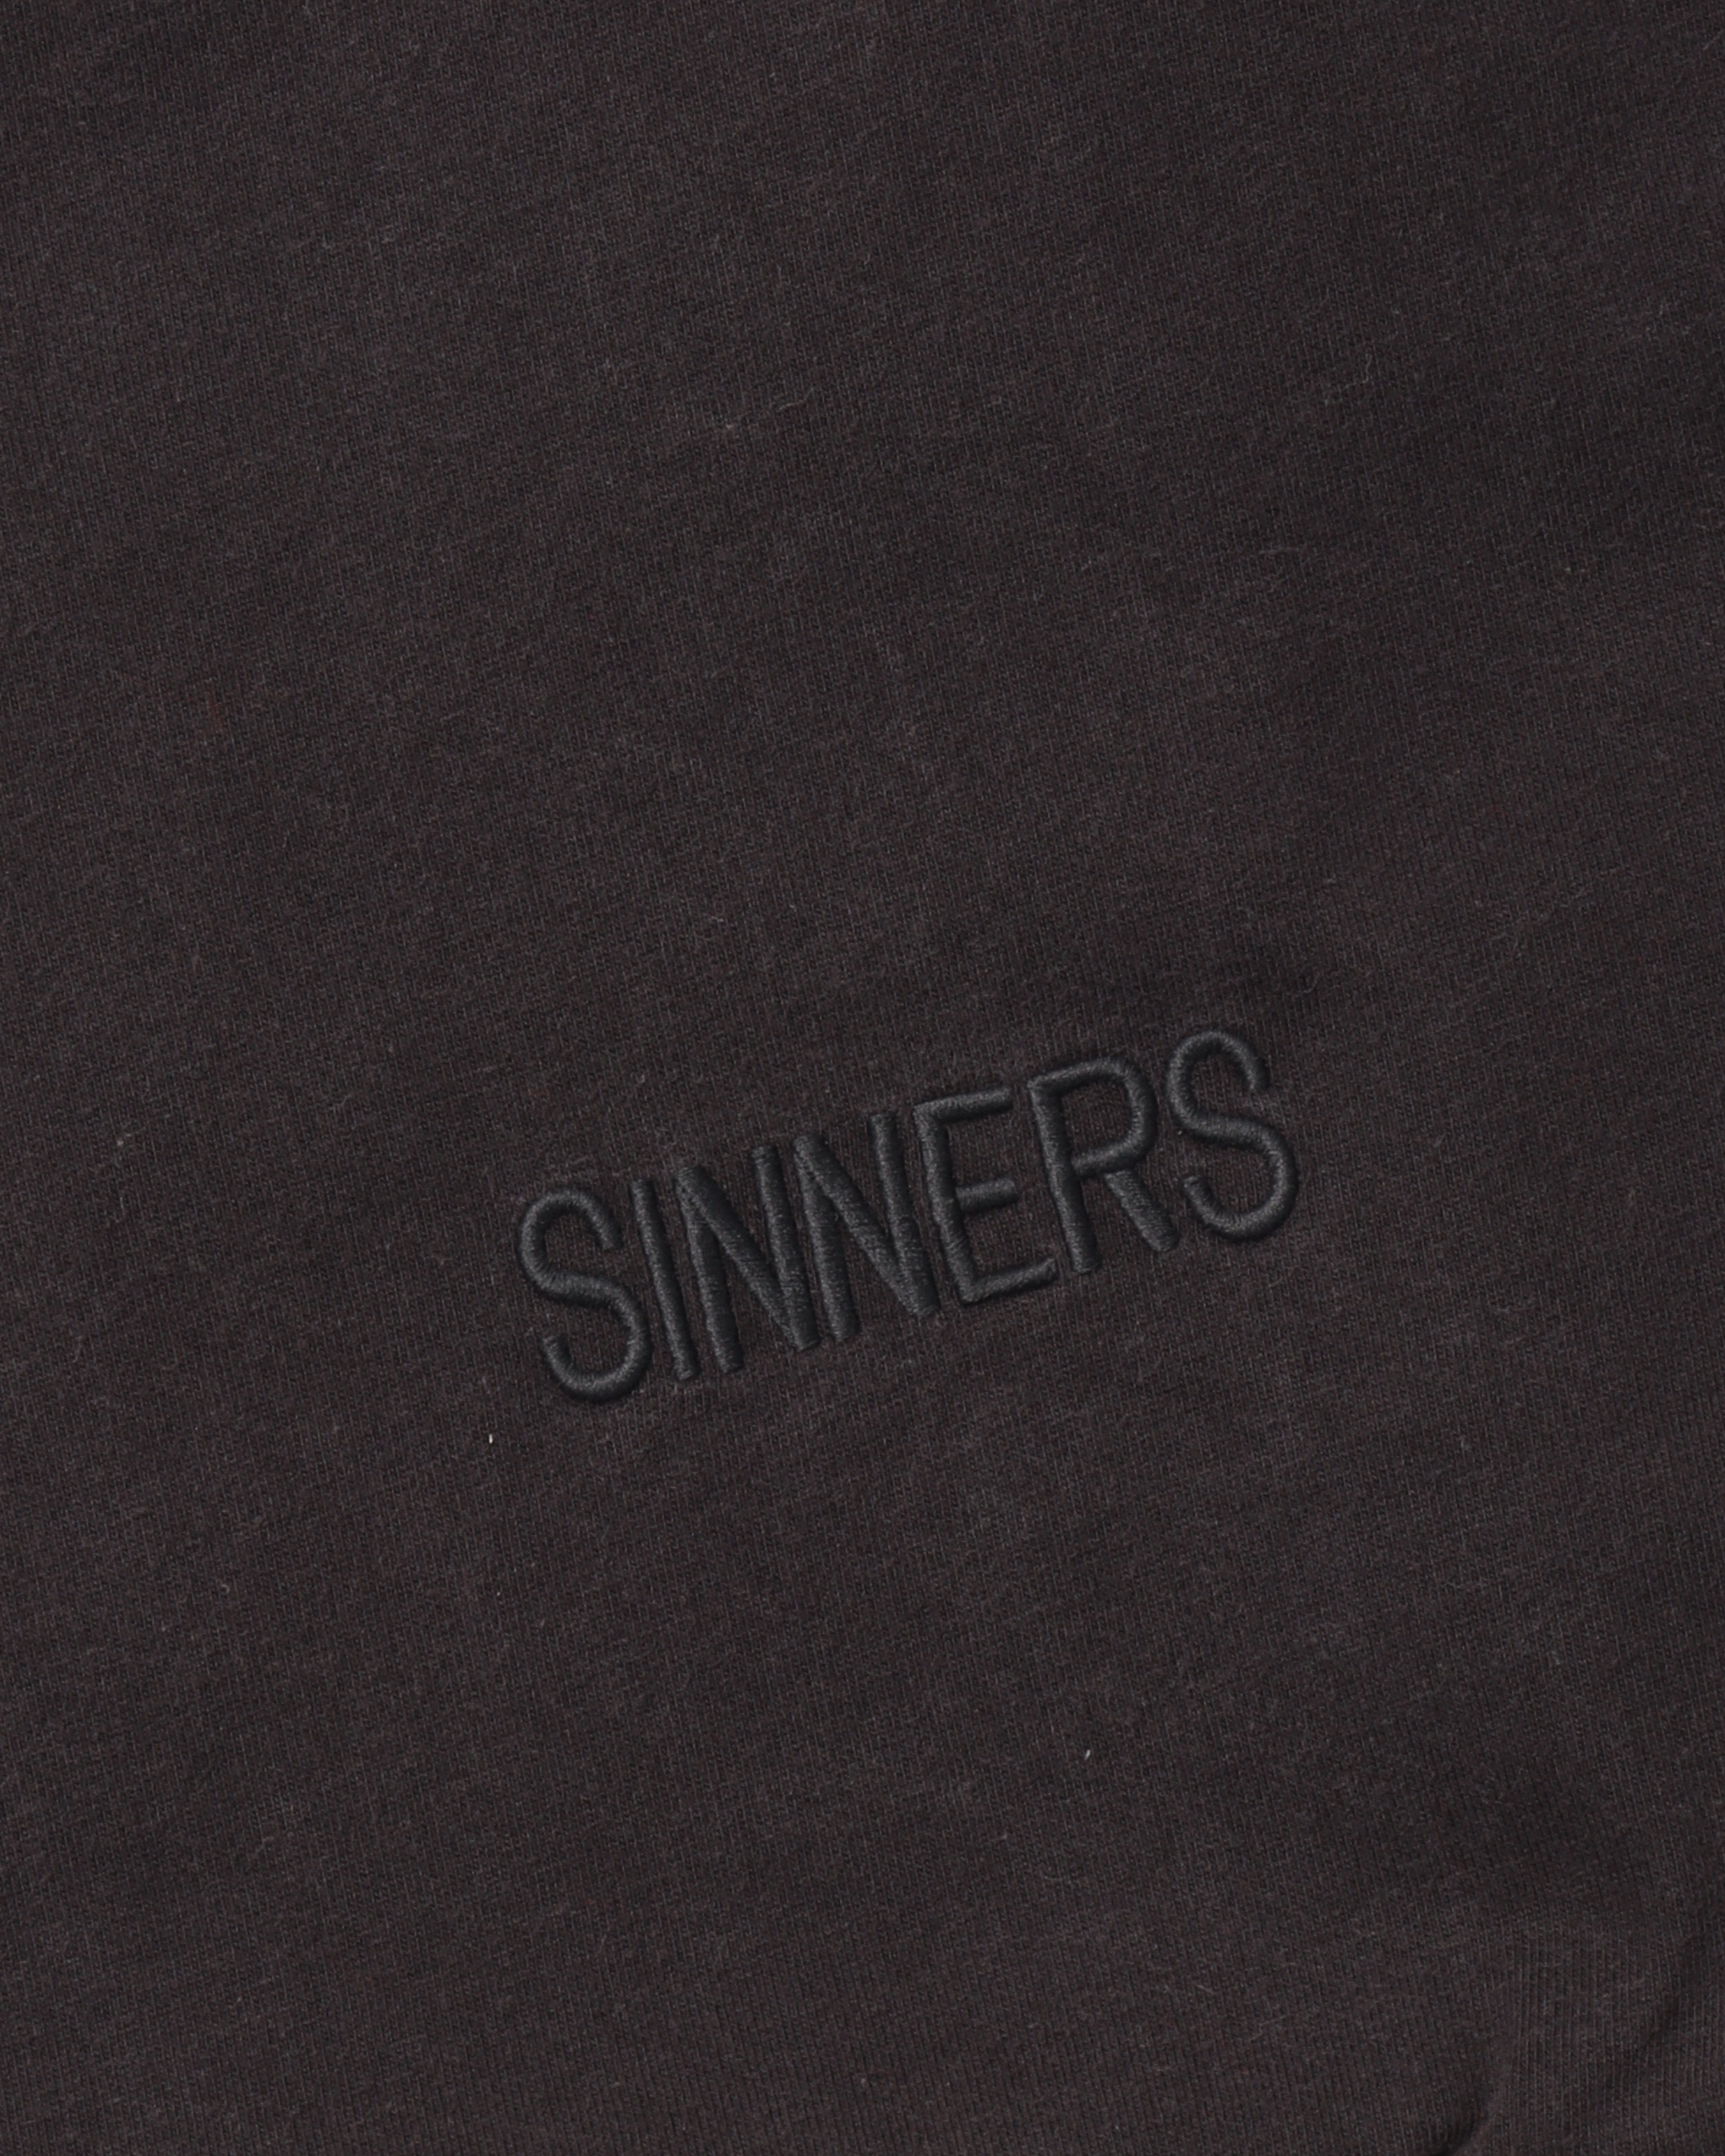 "SINNERS" Tonal Embroidered T-Shirt